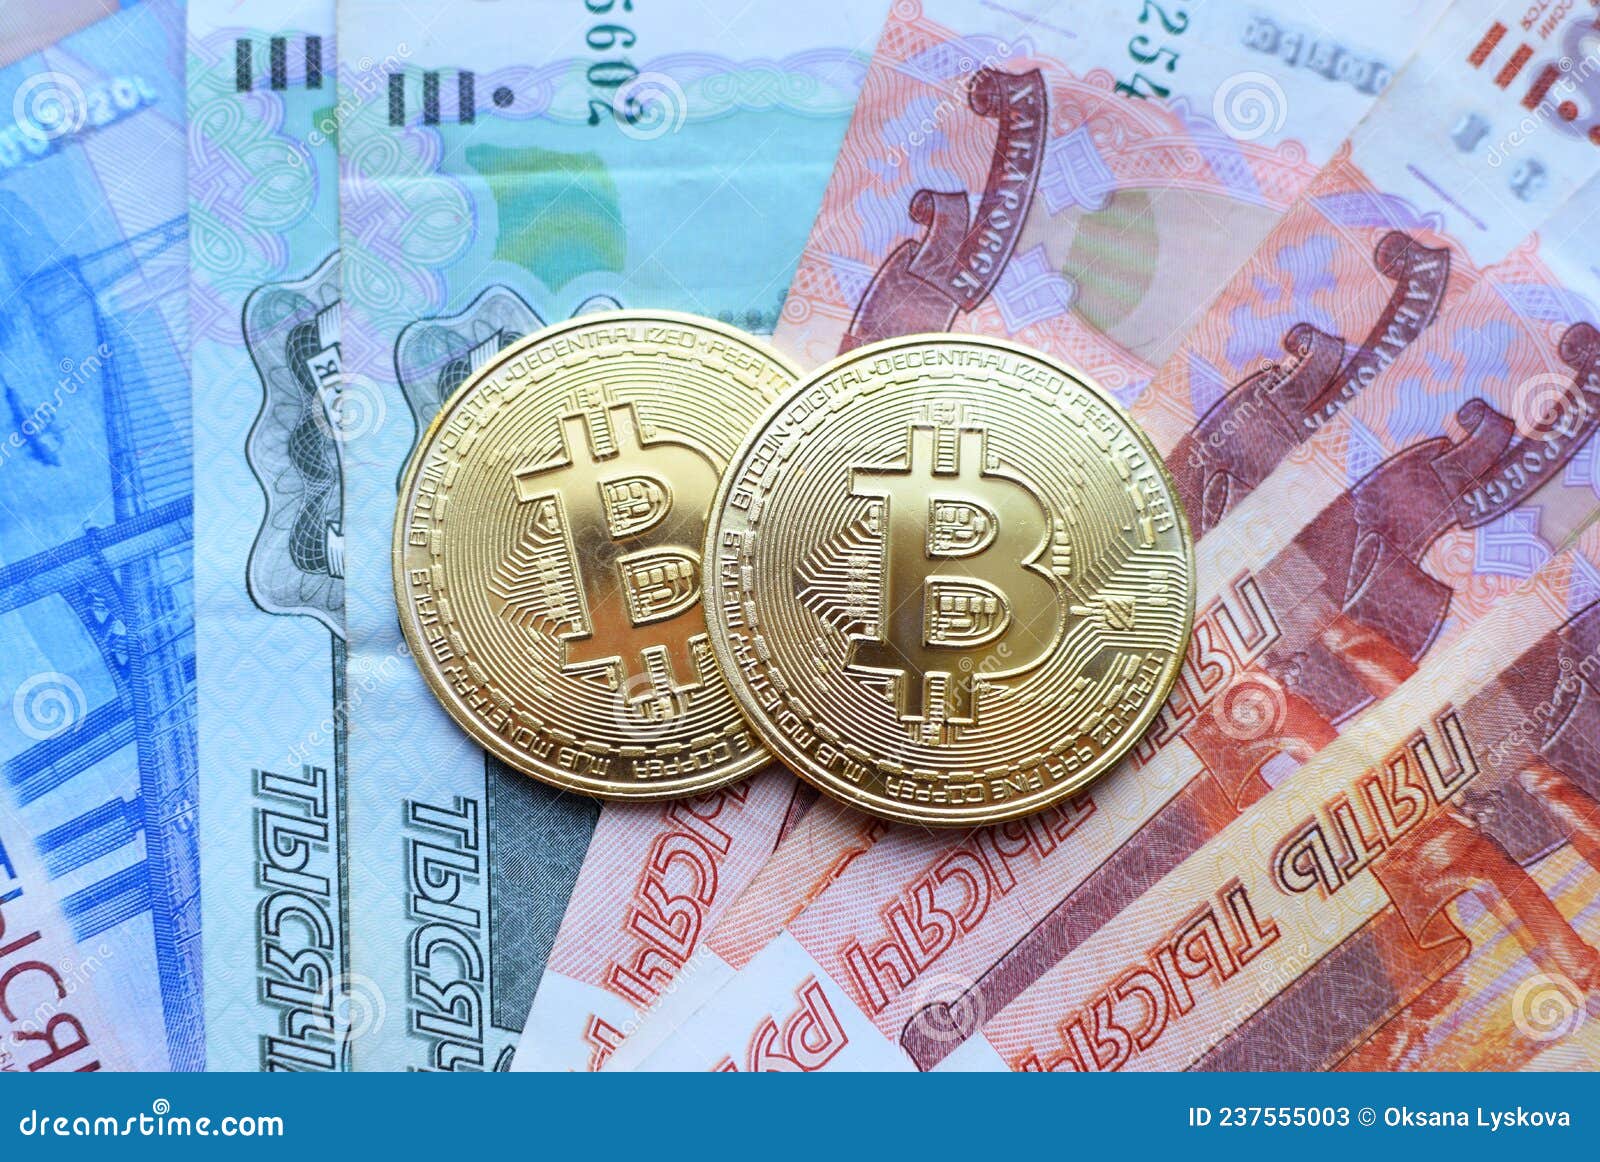 Metal Shiny Bitcoin Crypto Currency Coins on Rubles ...